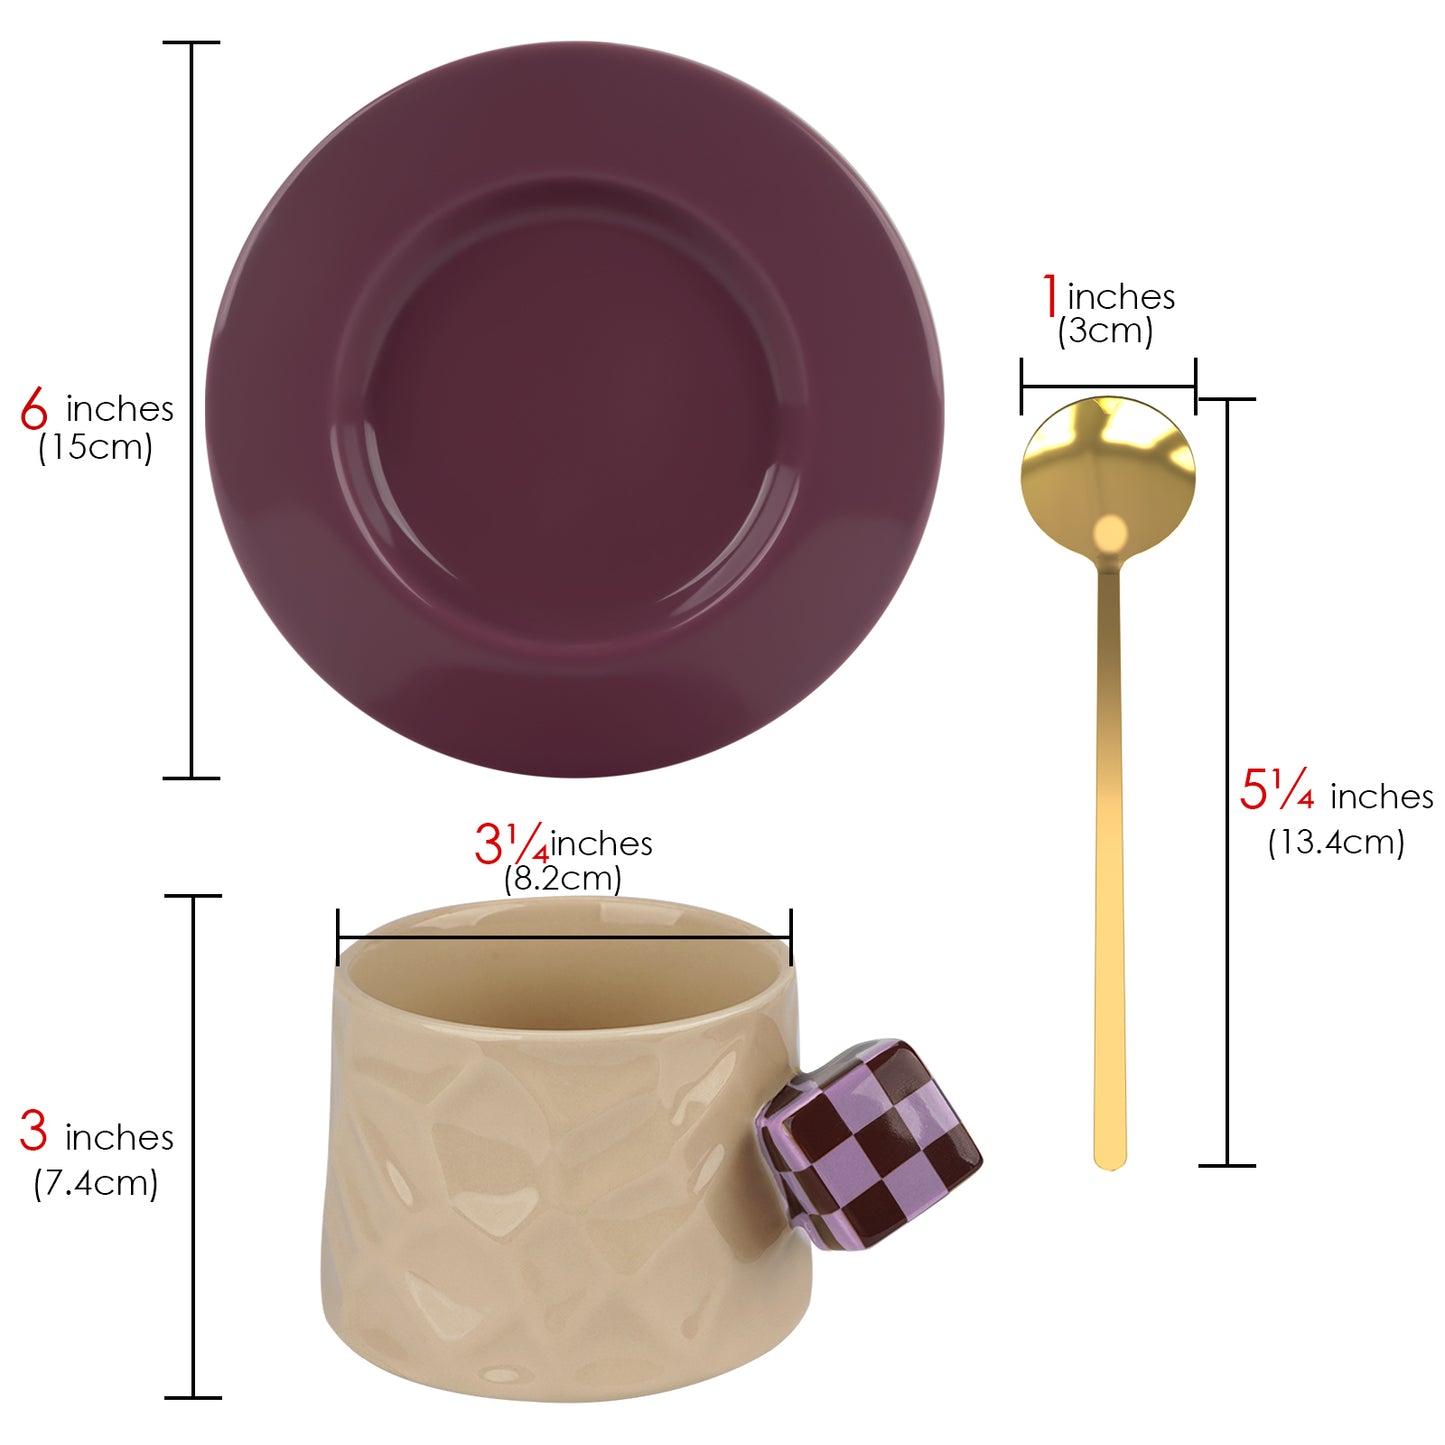 Novelty Tea Cup and Saucer Set with Cubic Handle, Ceramic Coffee Cups Mug for Home Office Party